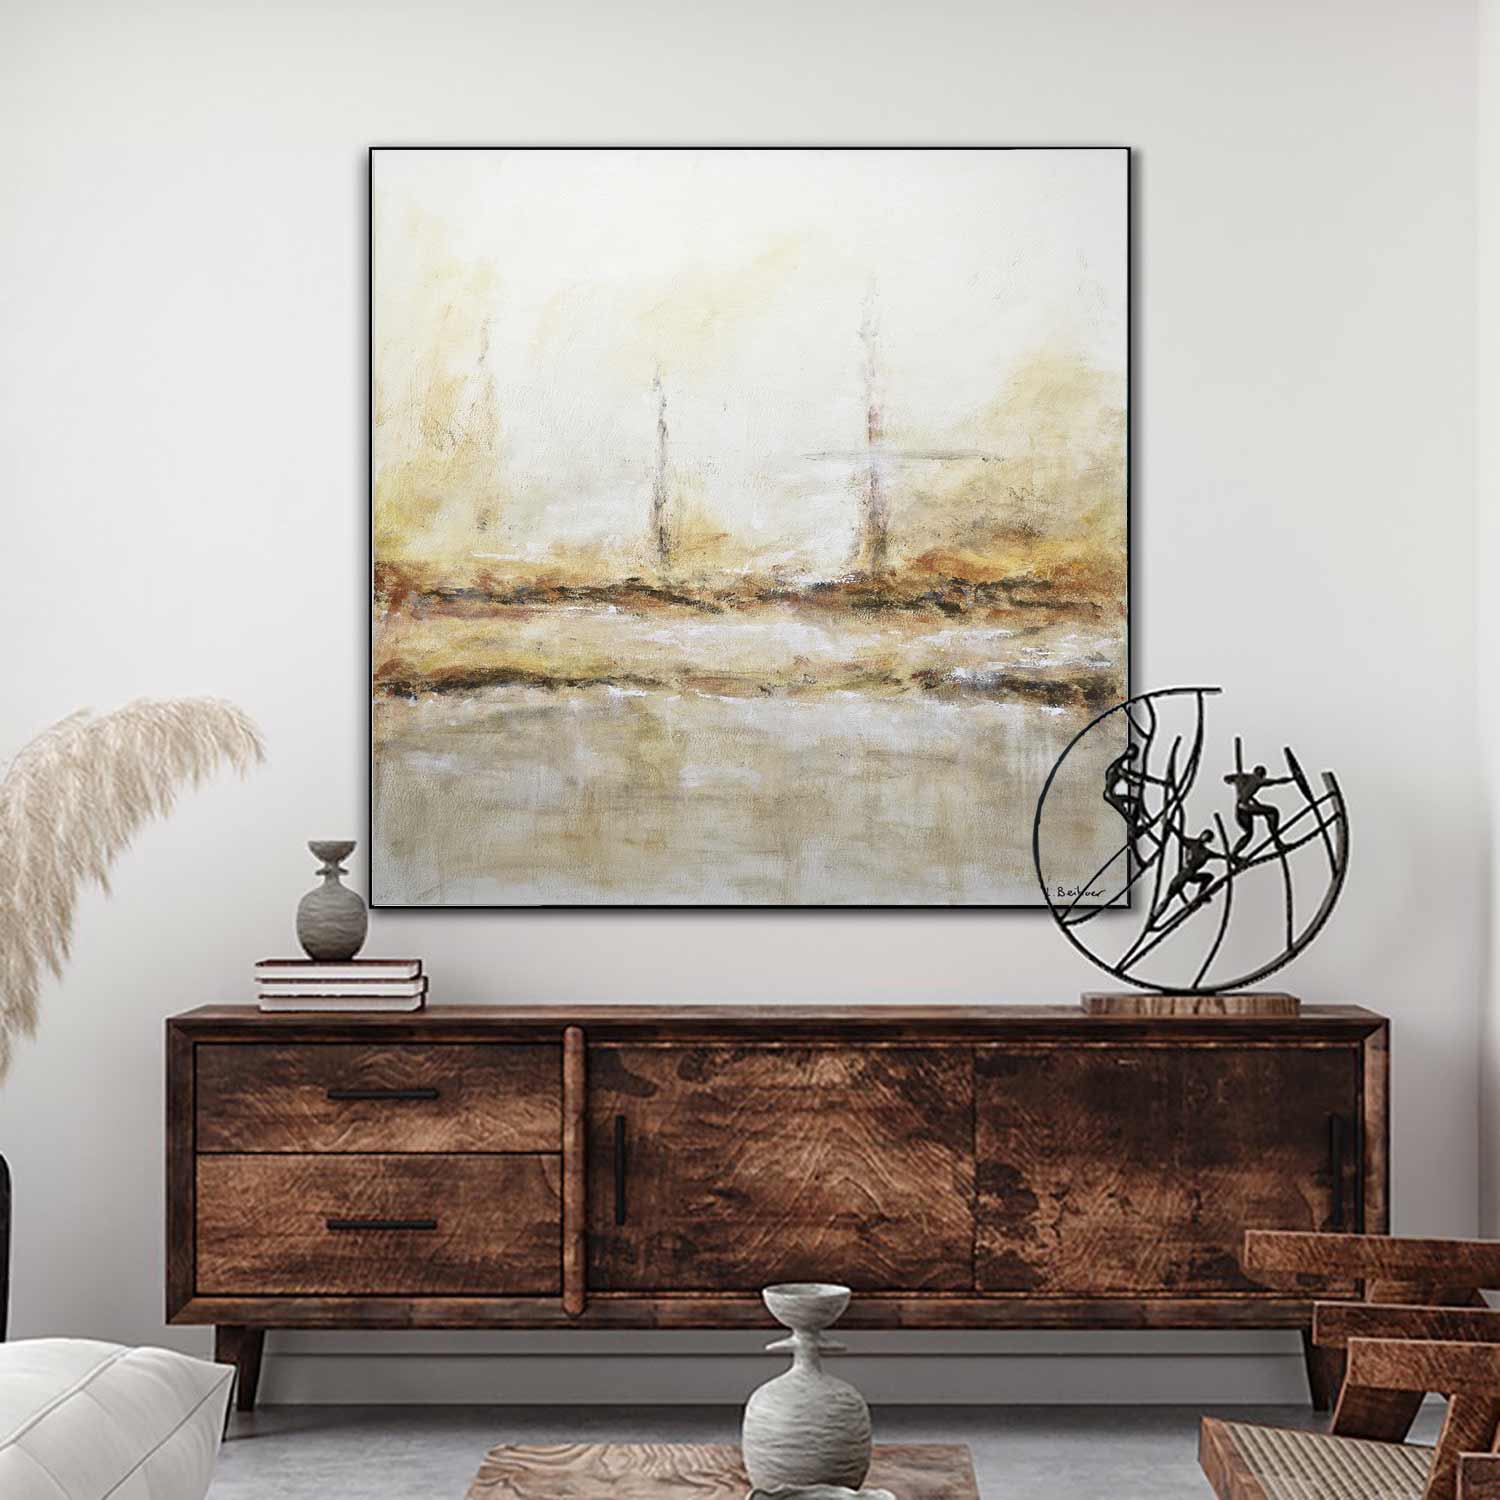 Light Abstract Wall Art Painting Natural Colors "Taken"